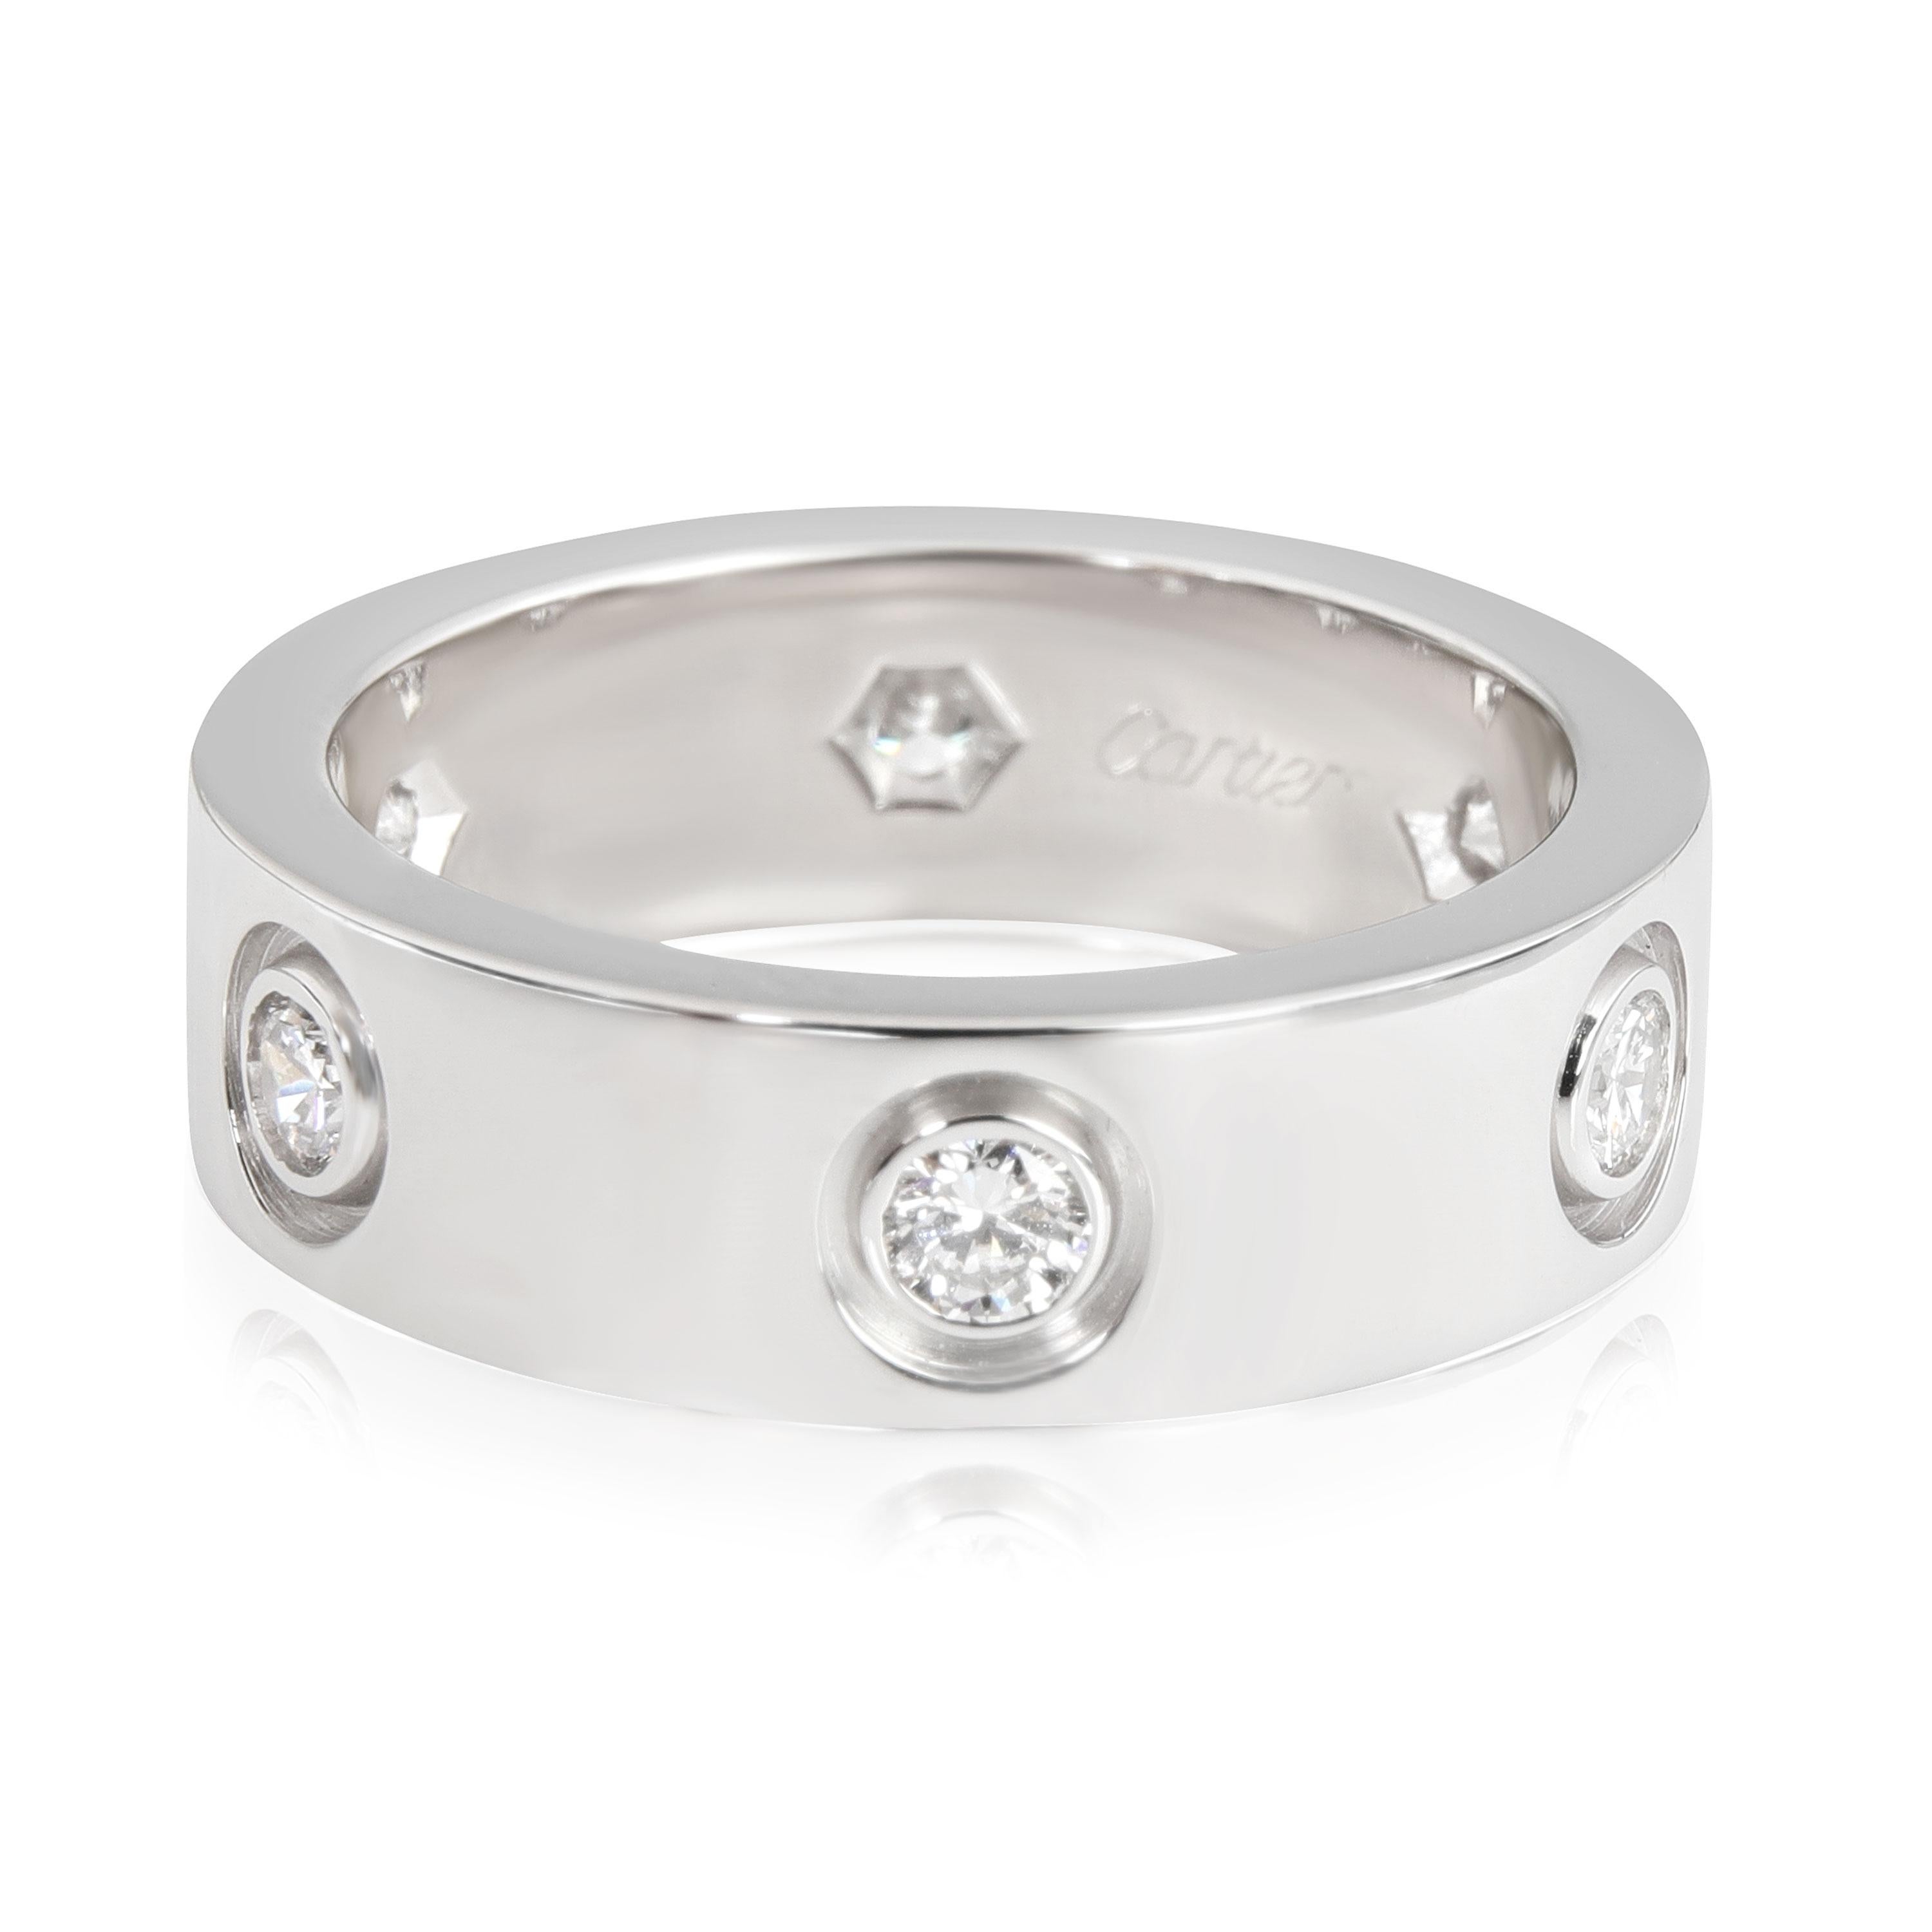 Cartier Love Diamond Ring in 18kt White Gold 0.46 CTW

PRIMARY DETAILS
SKU: 114048
Listing Title: Cartier Love Diamond Ring in 18kt White Gold 0.46 CTW
Condition Description: Retails for 6000 USD. In excellent condition and recently polished. Ring